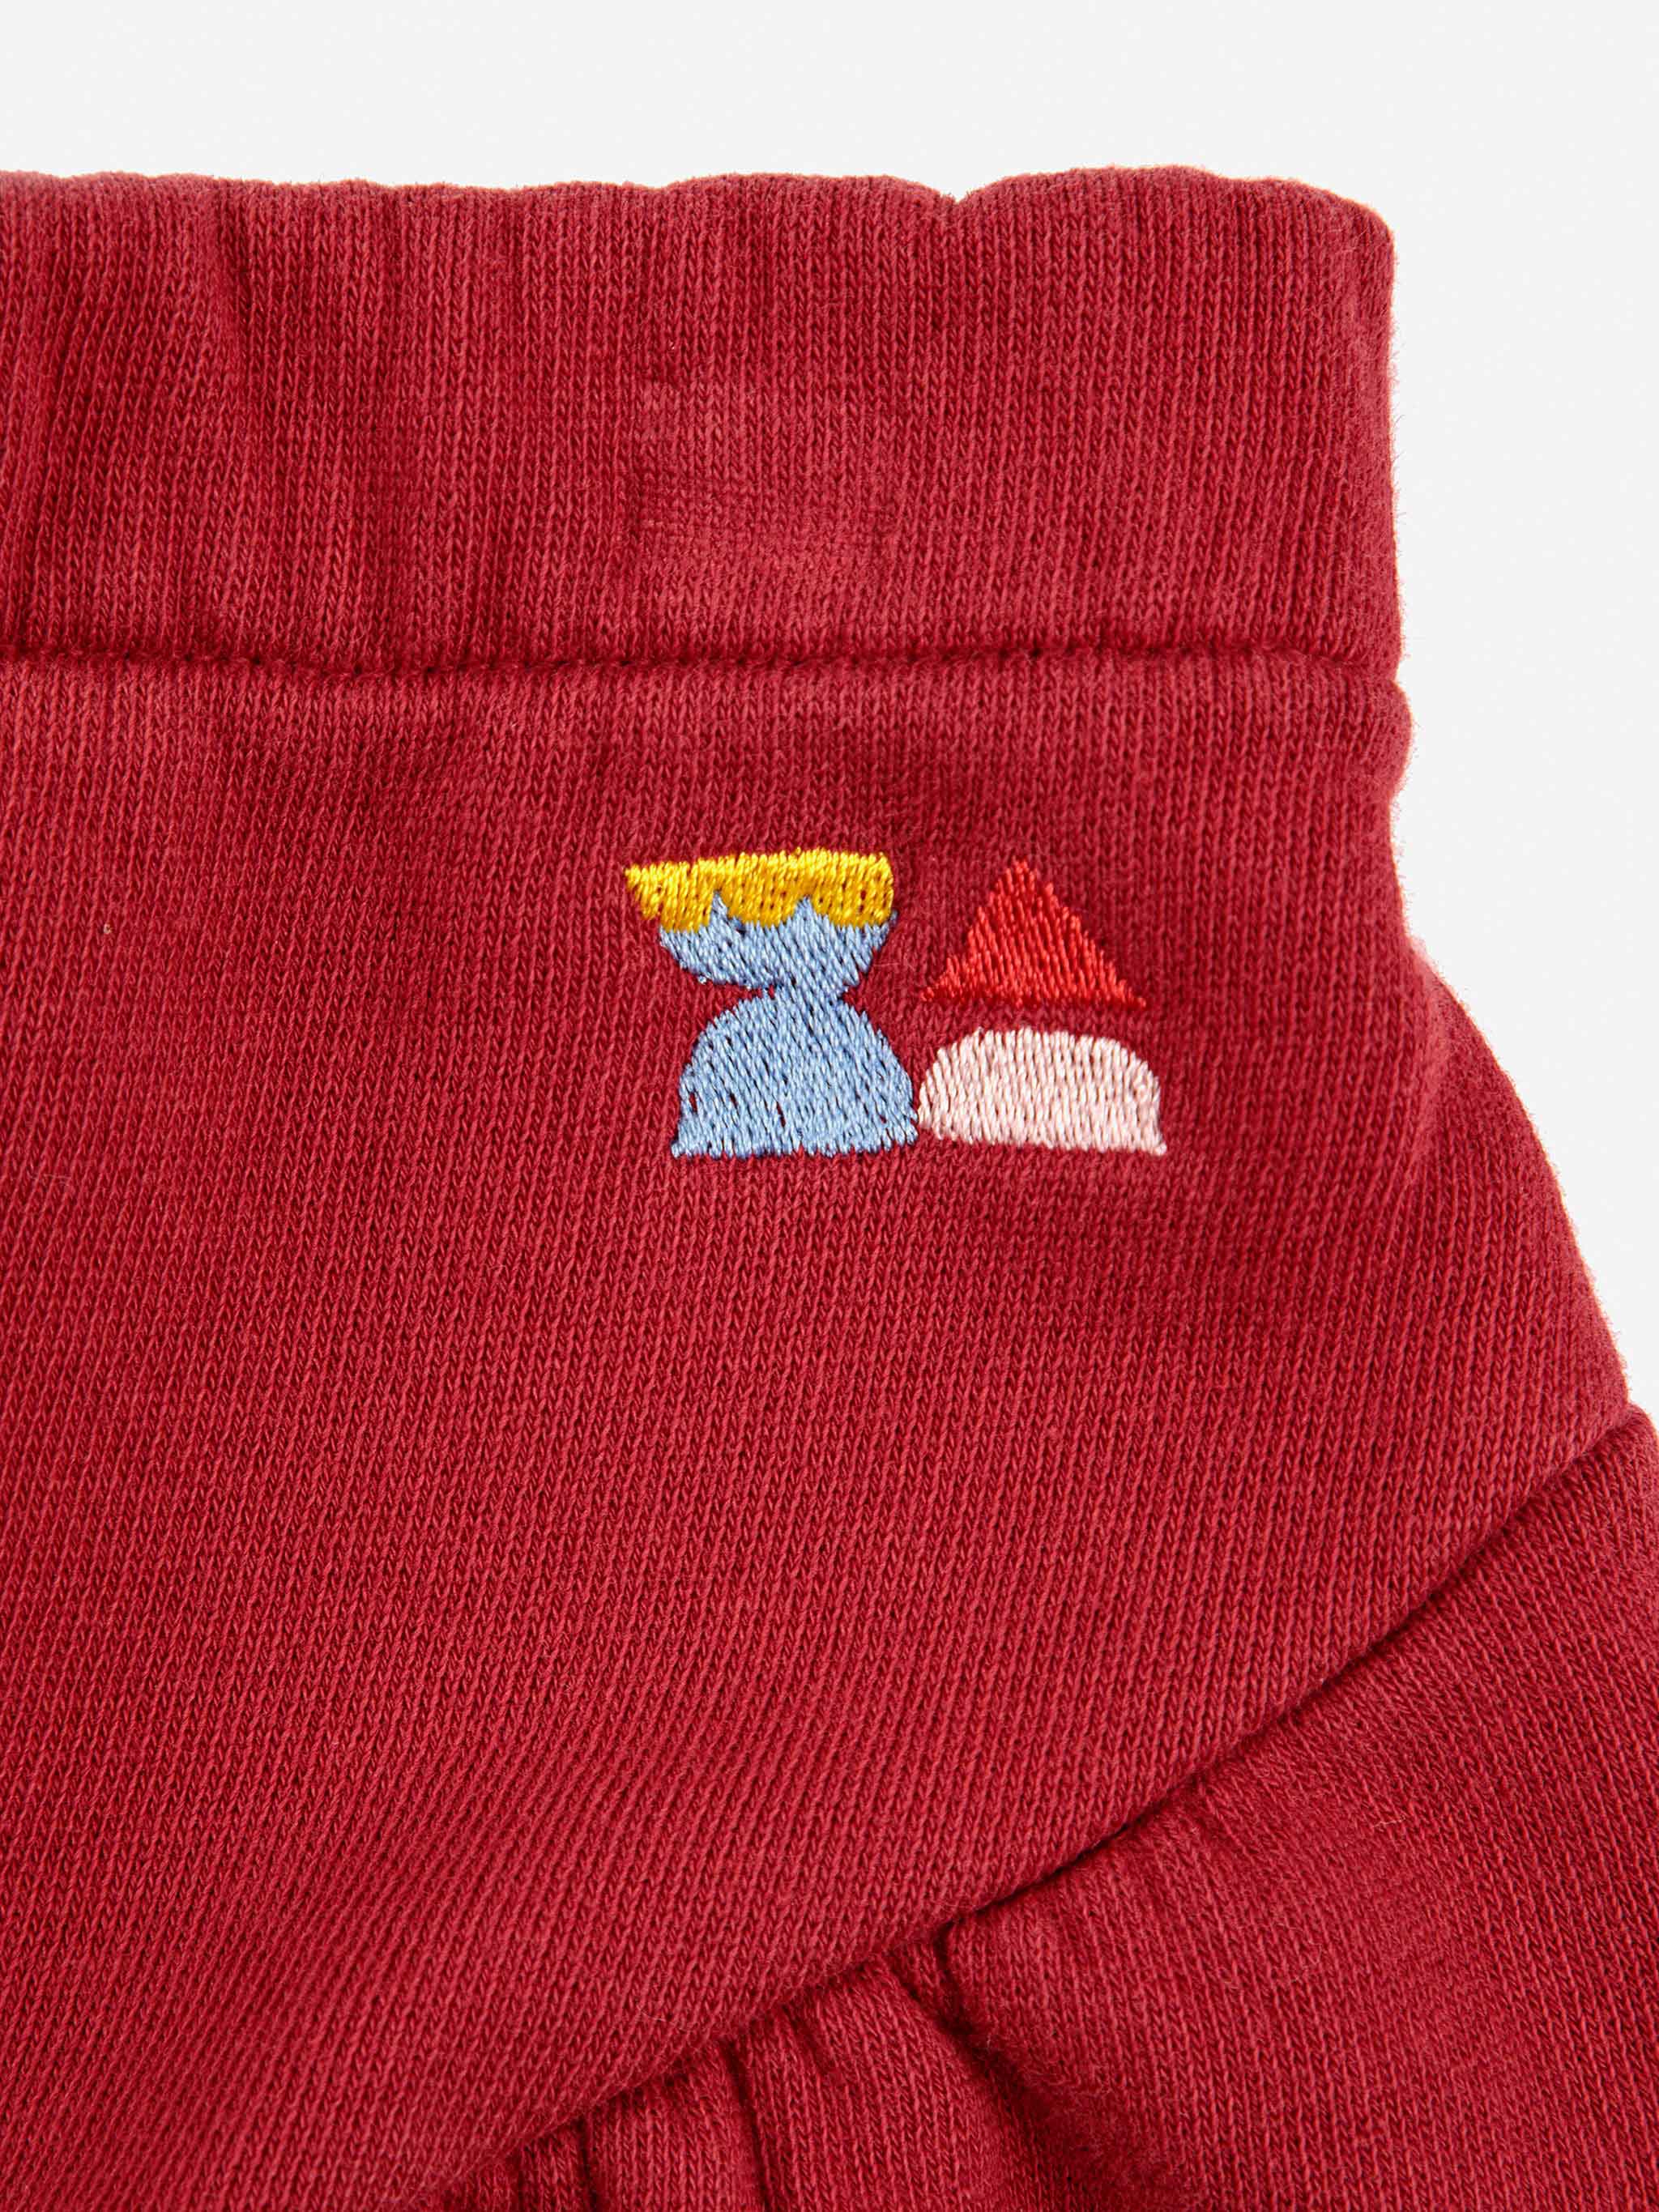 Funny Friends skirt - 2-3Y